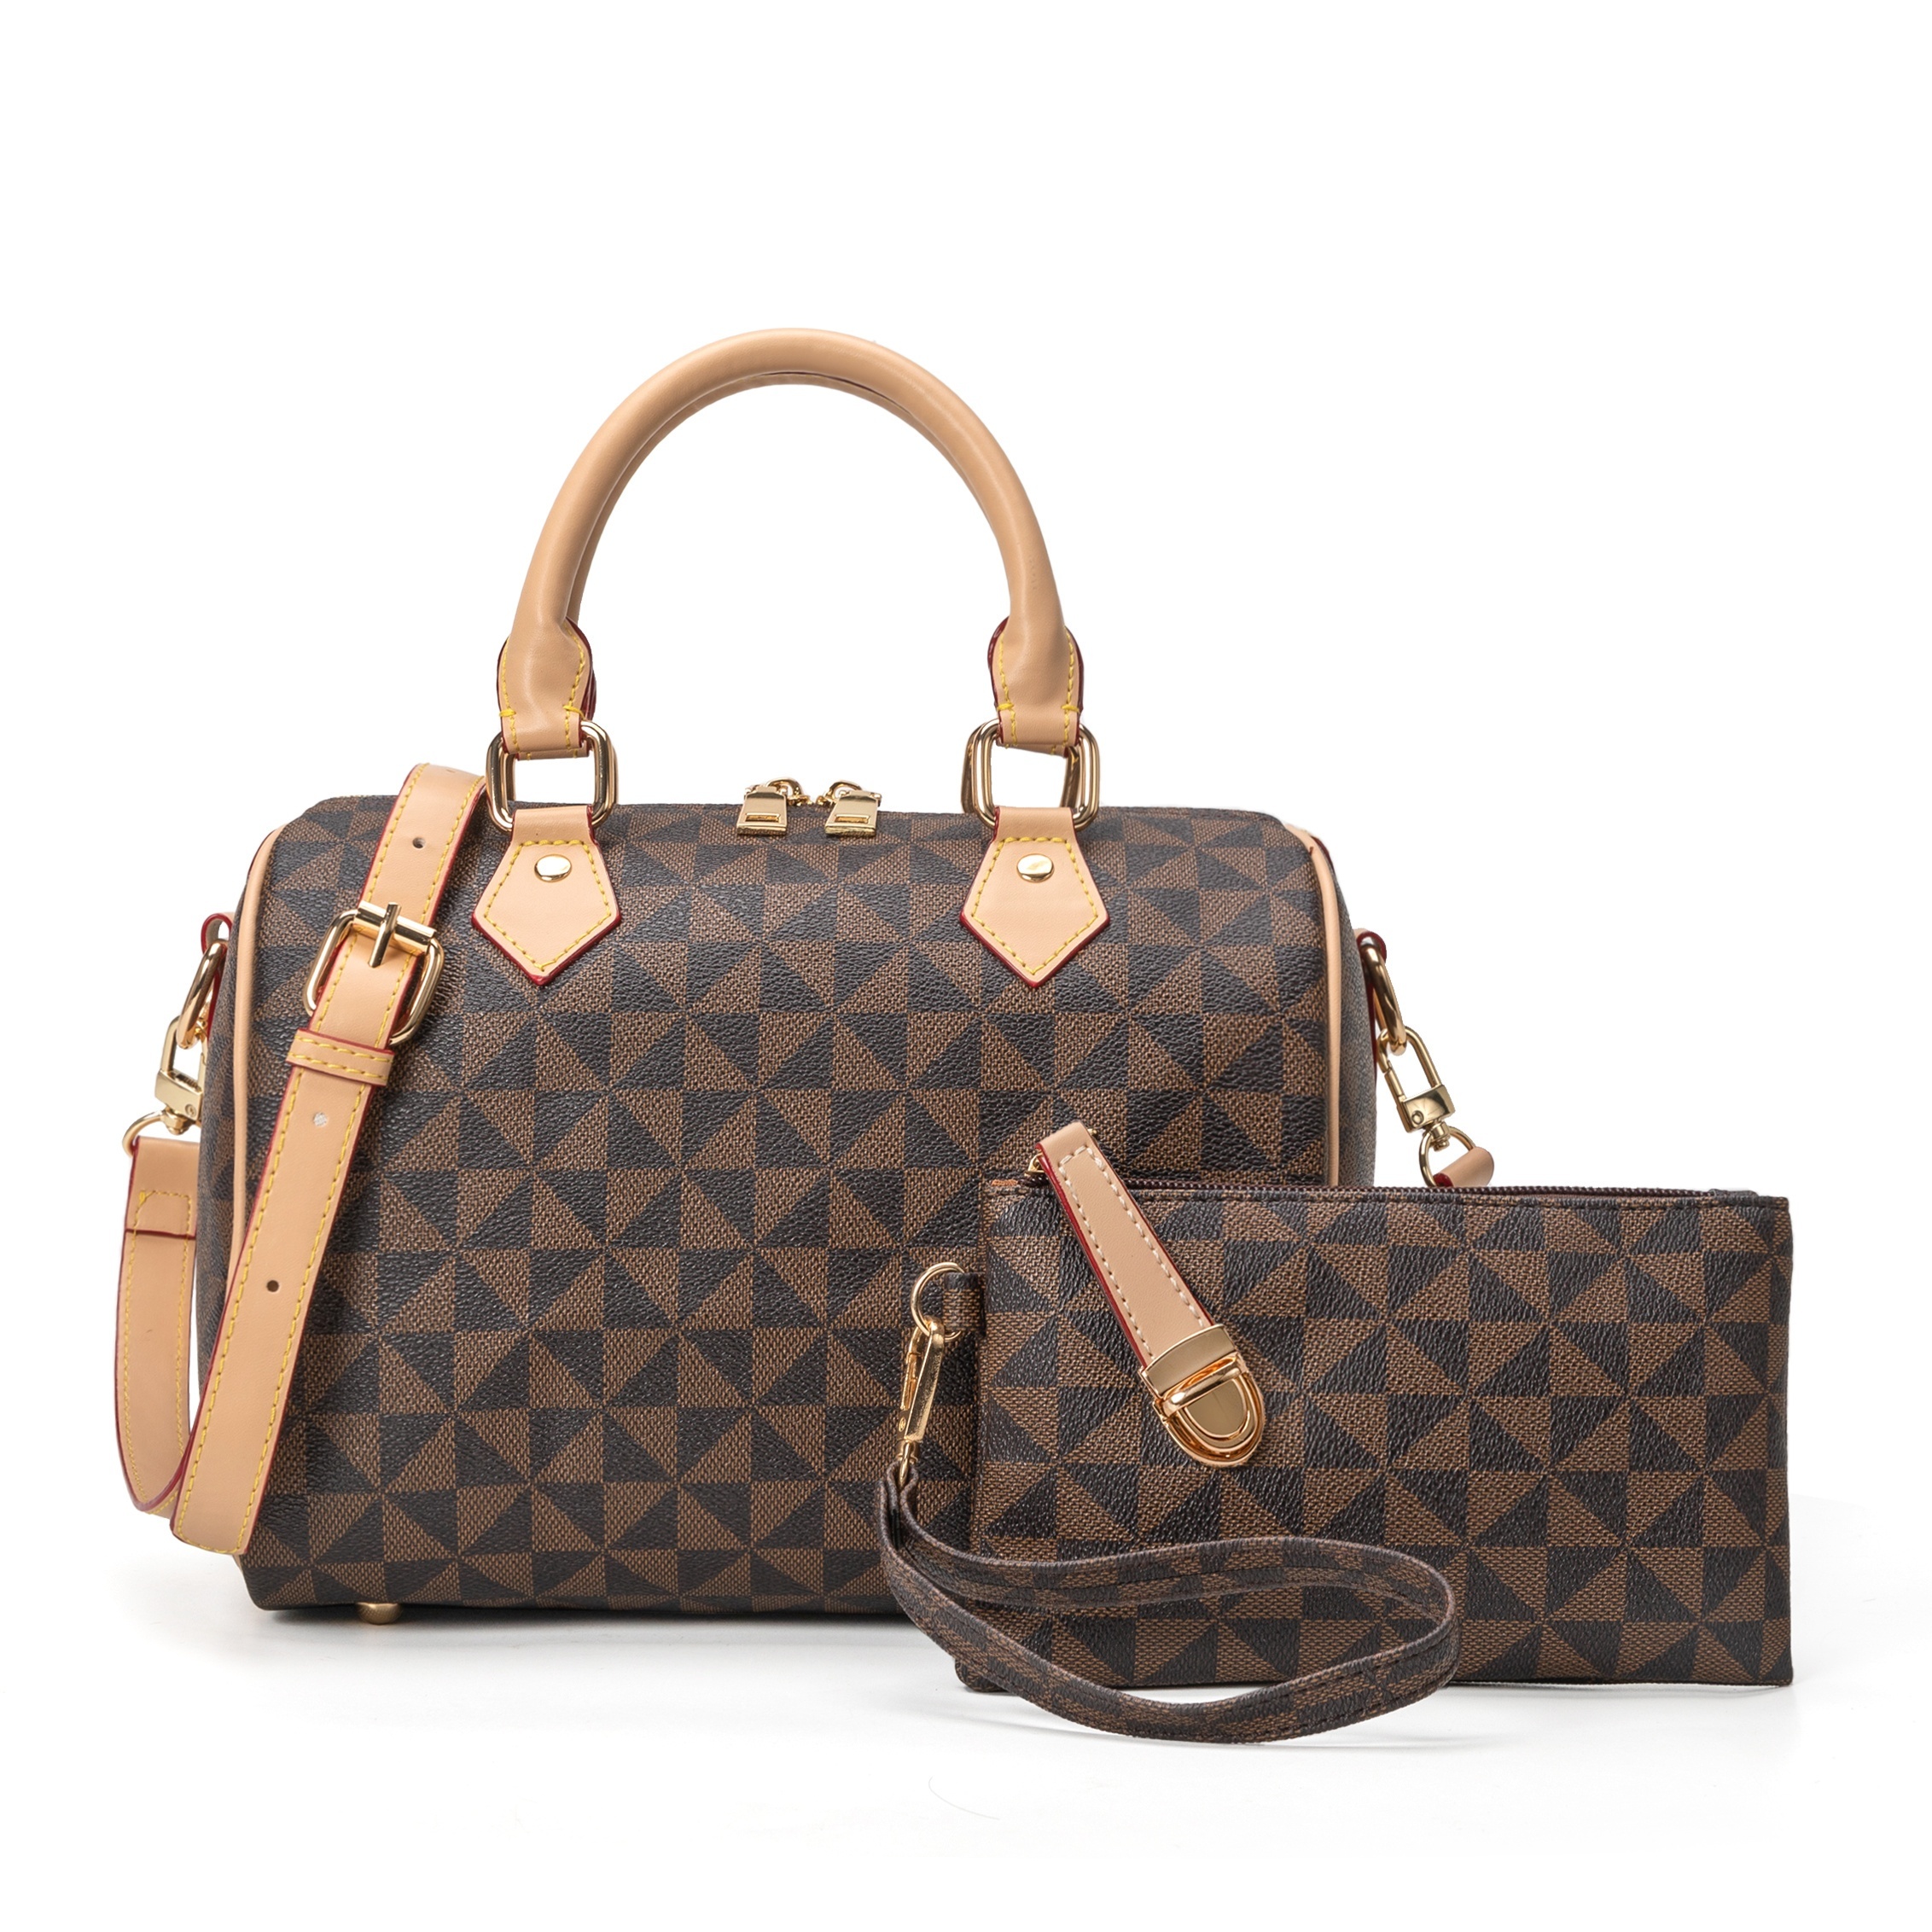 Bow ruffles handle cover (protector) for LV Speedy bag